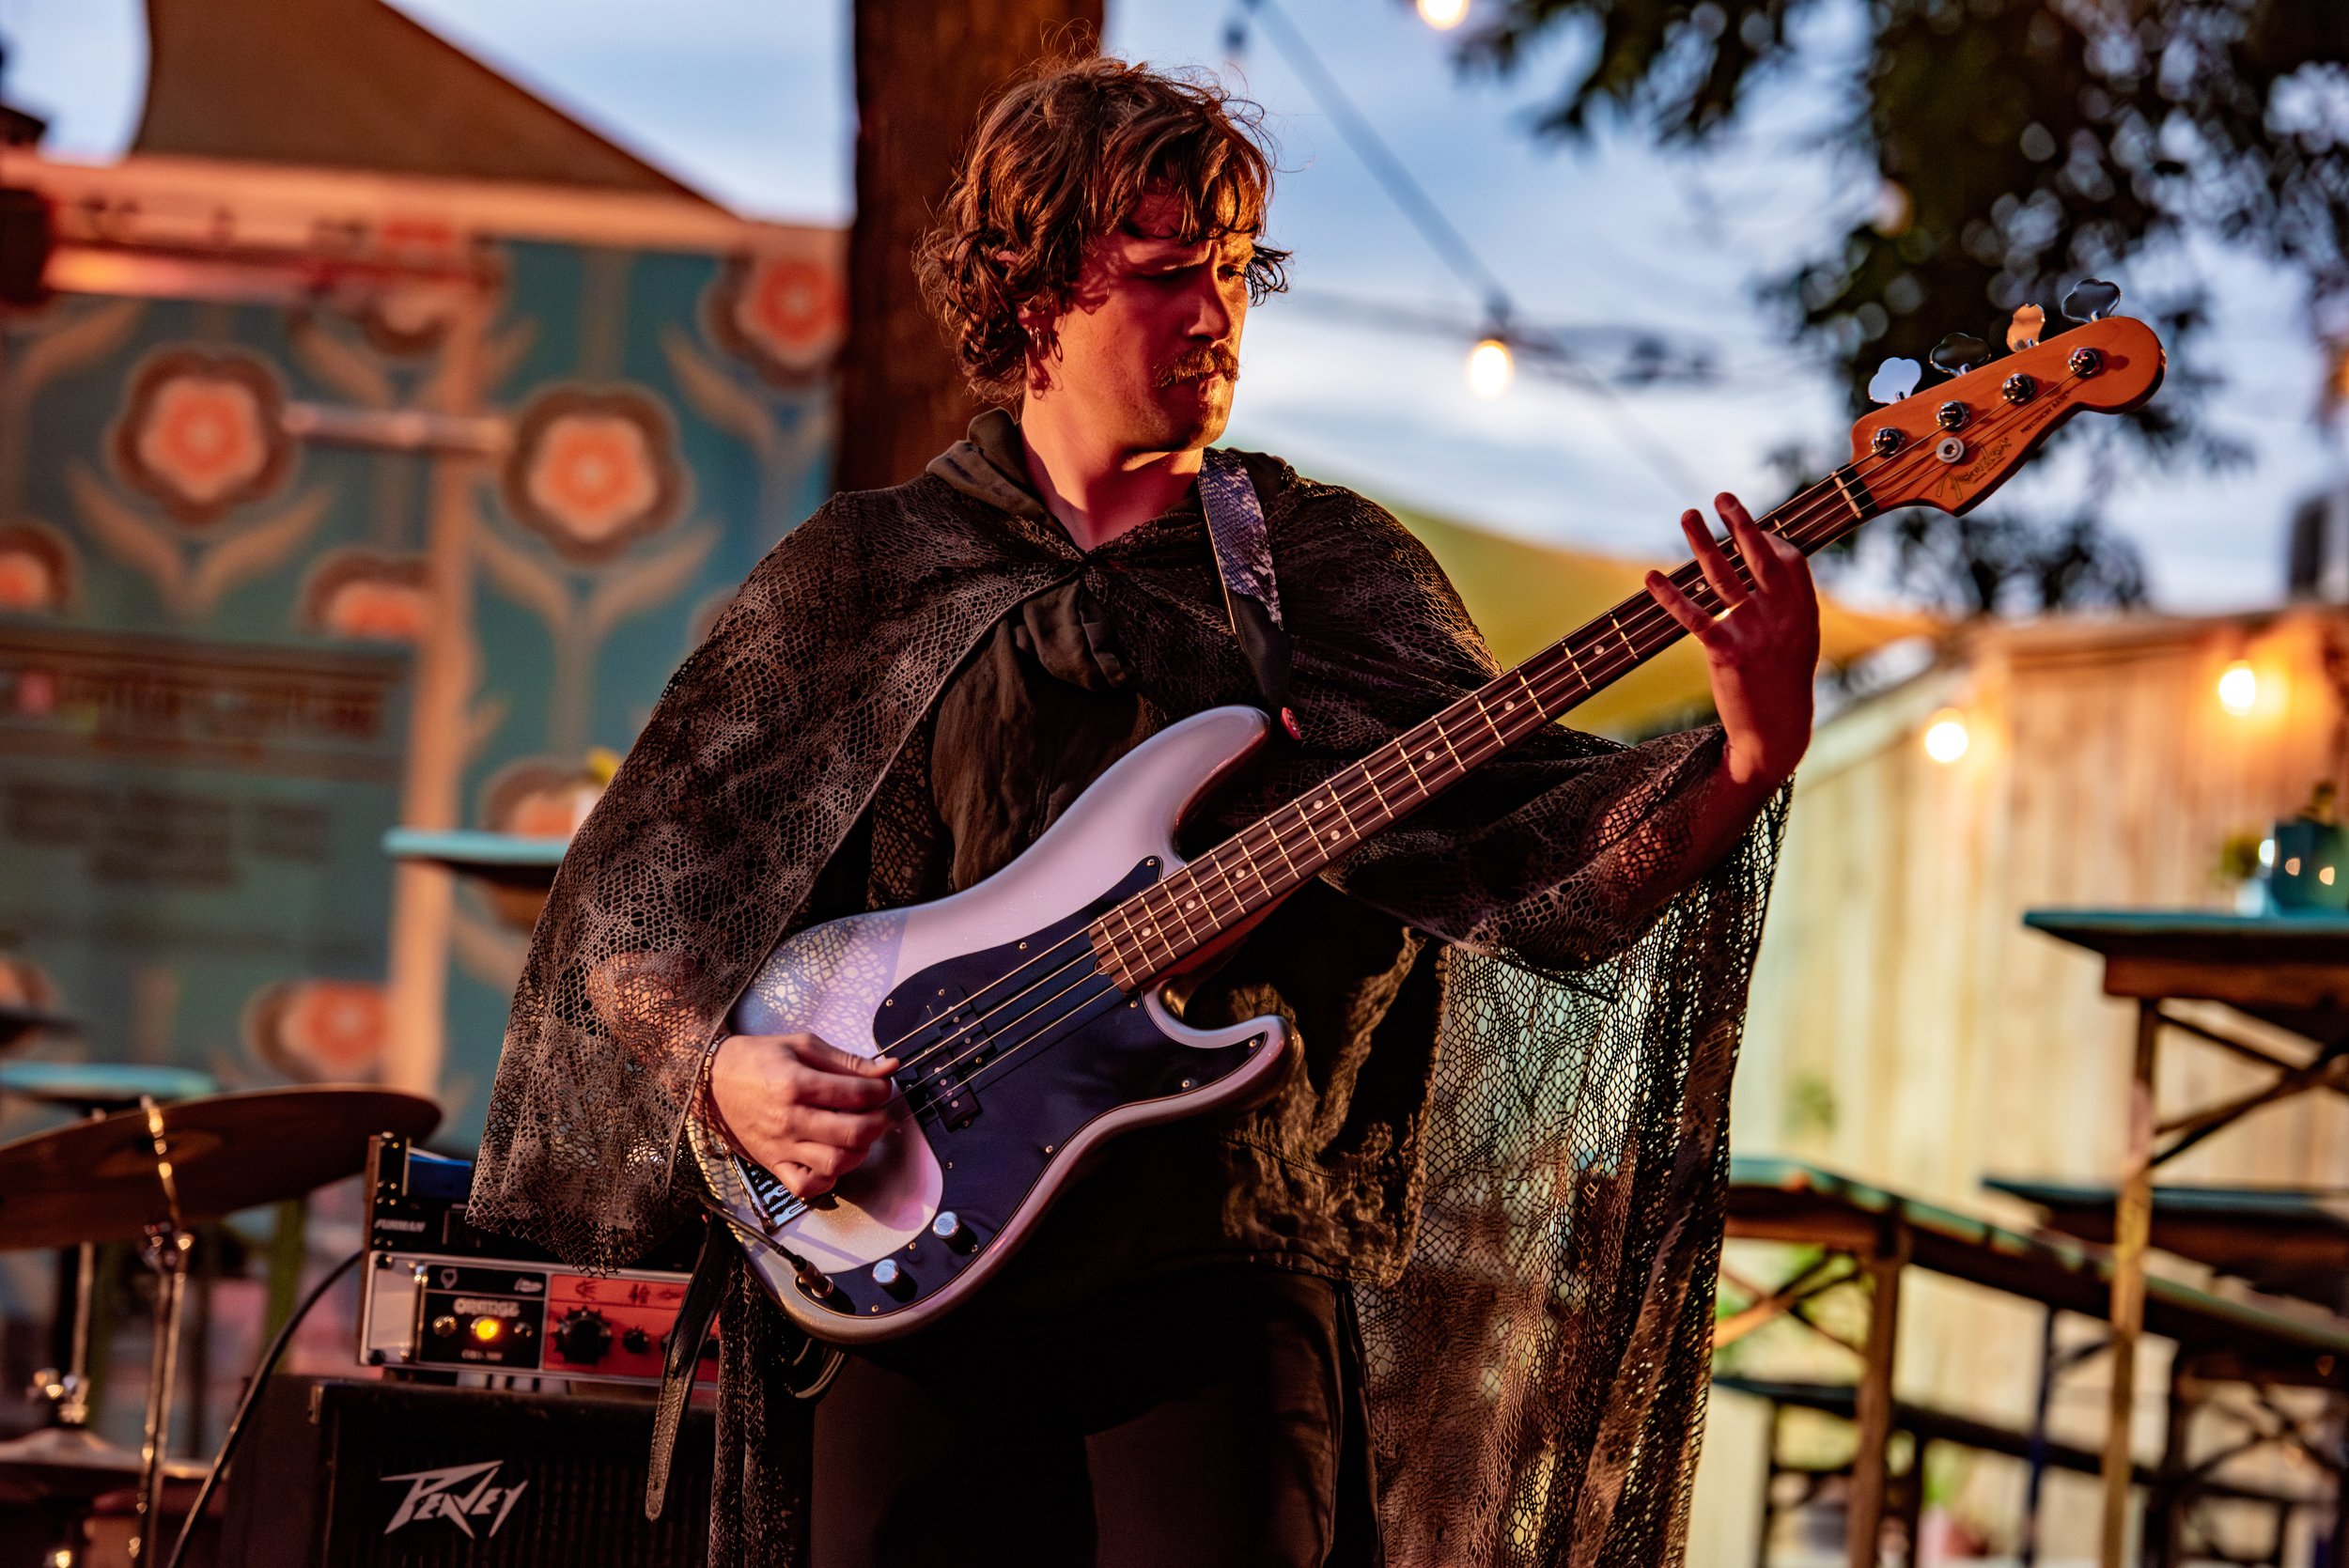  Dmitri’s bass player Lewis Grimes performs in his warlock costume.  Photo by Mackenzie Coleman  